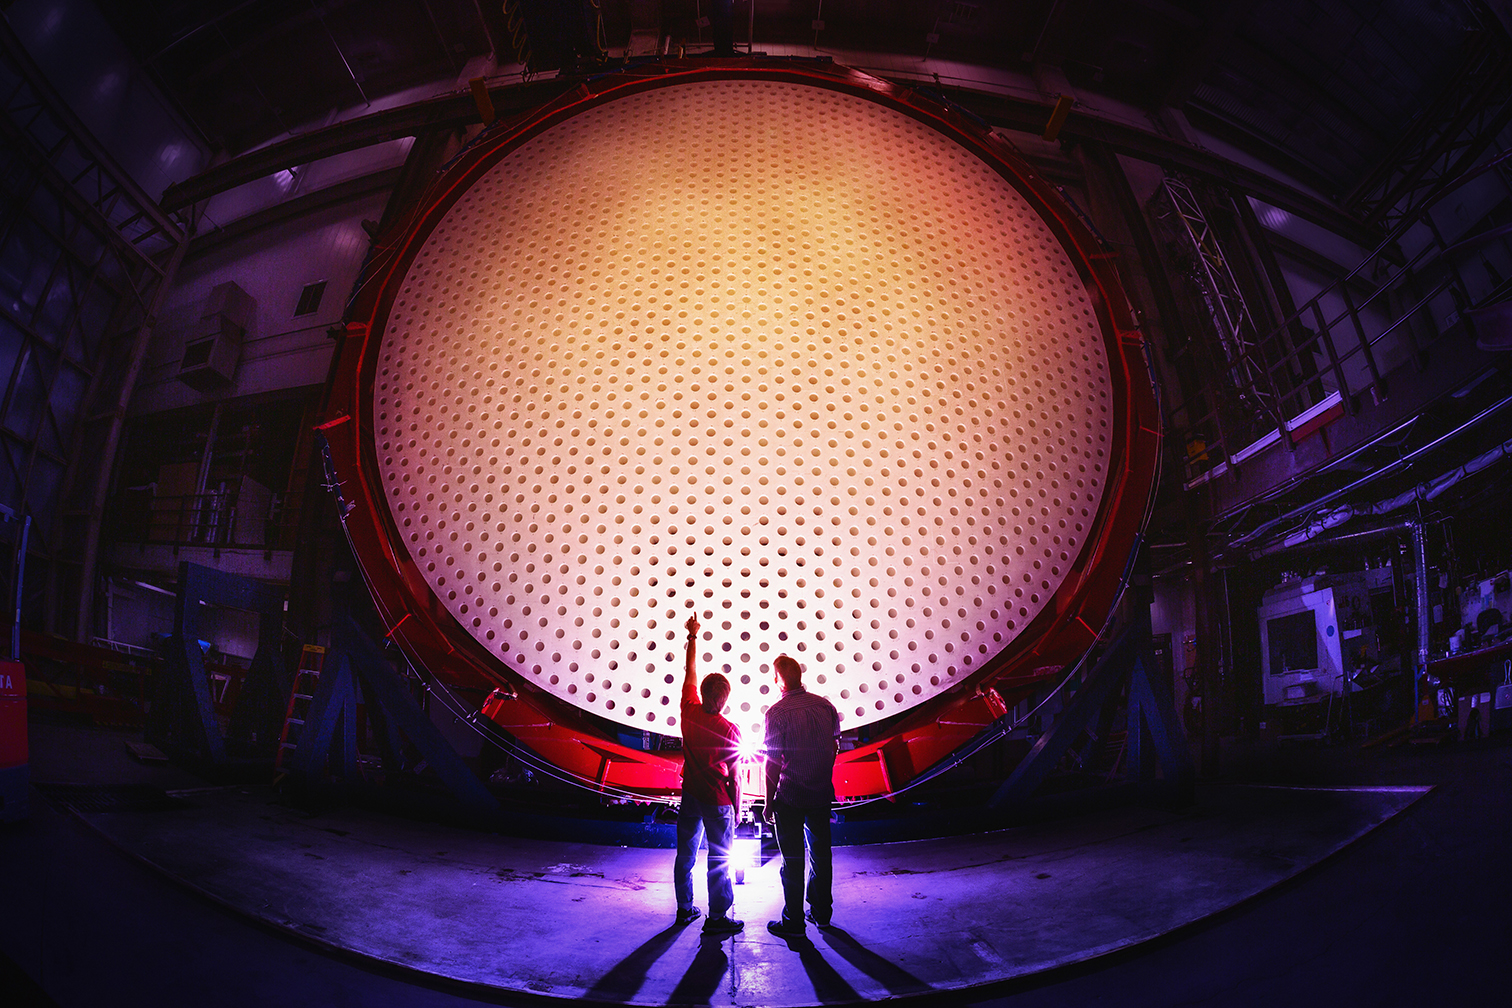 The Giant Magellan Telescope primary mirror segment 5 sits vertically at the Richard F. Caris Mirror Lab at the University of Arizona. Each of the seven mirror segments of the Giant Magellan Telescope is 8.4 meters in diameter, together forming a single optical surface of 24.5 meters with a total collecting area of 368 square meters.